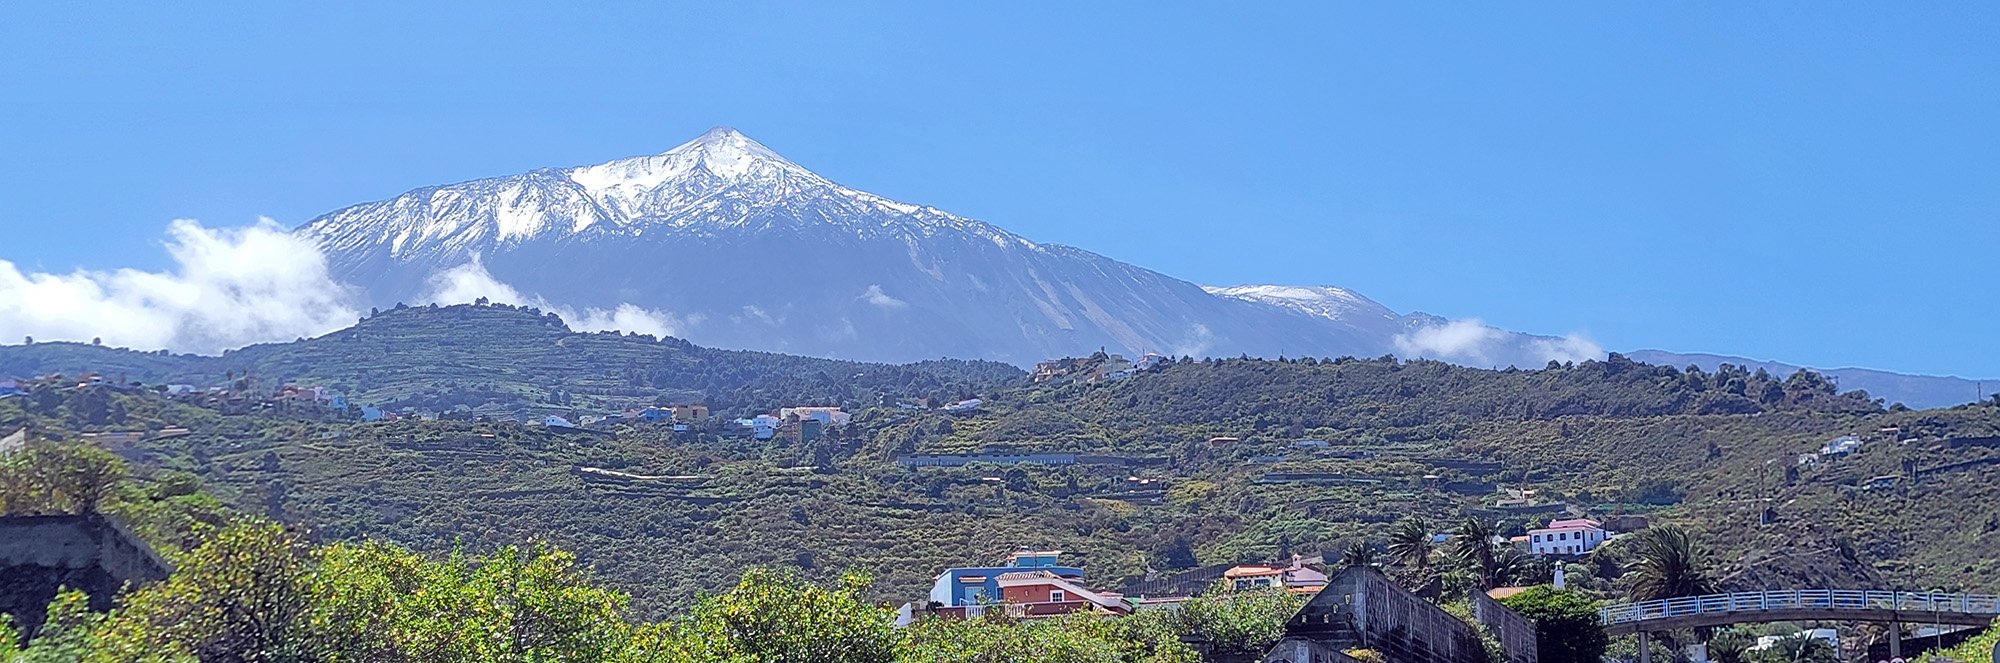 When you get a clear day Teide is just an absolutely crazy thing to witness from the North side. The snow still hadn't melted. How does it even snow there? The clouds don't reach.